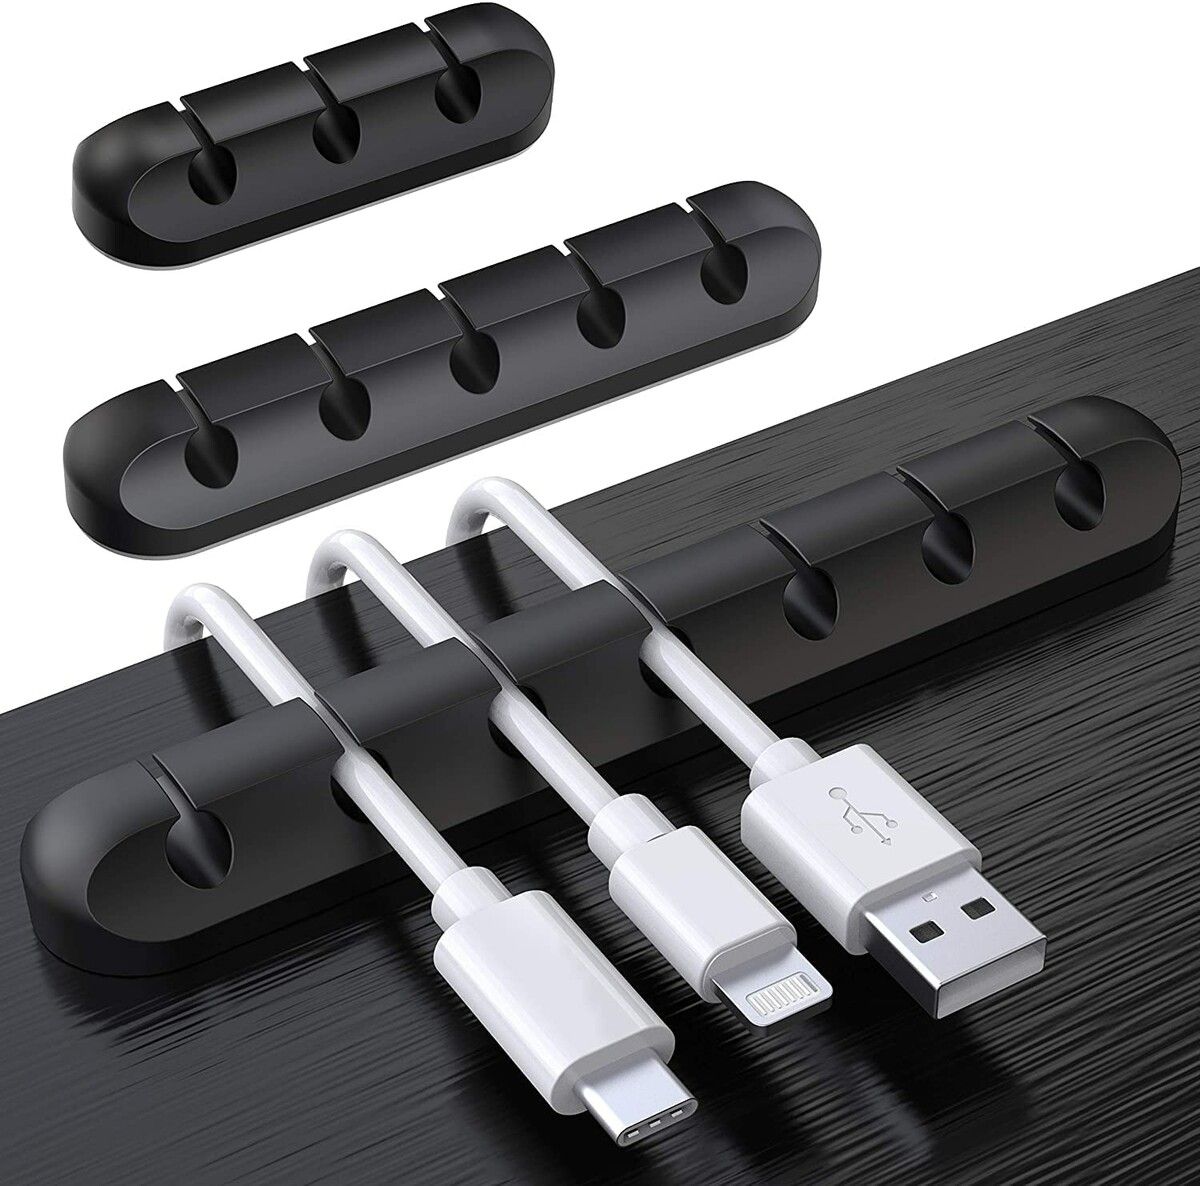 6-Pack Cable Holder Clips, Desktop Cable Organizer Cord Wire Management for USB Charging Cable Power Cord Mouse Cable PC Office Home